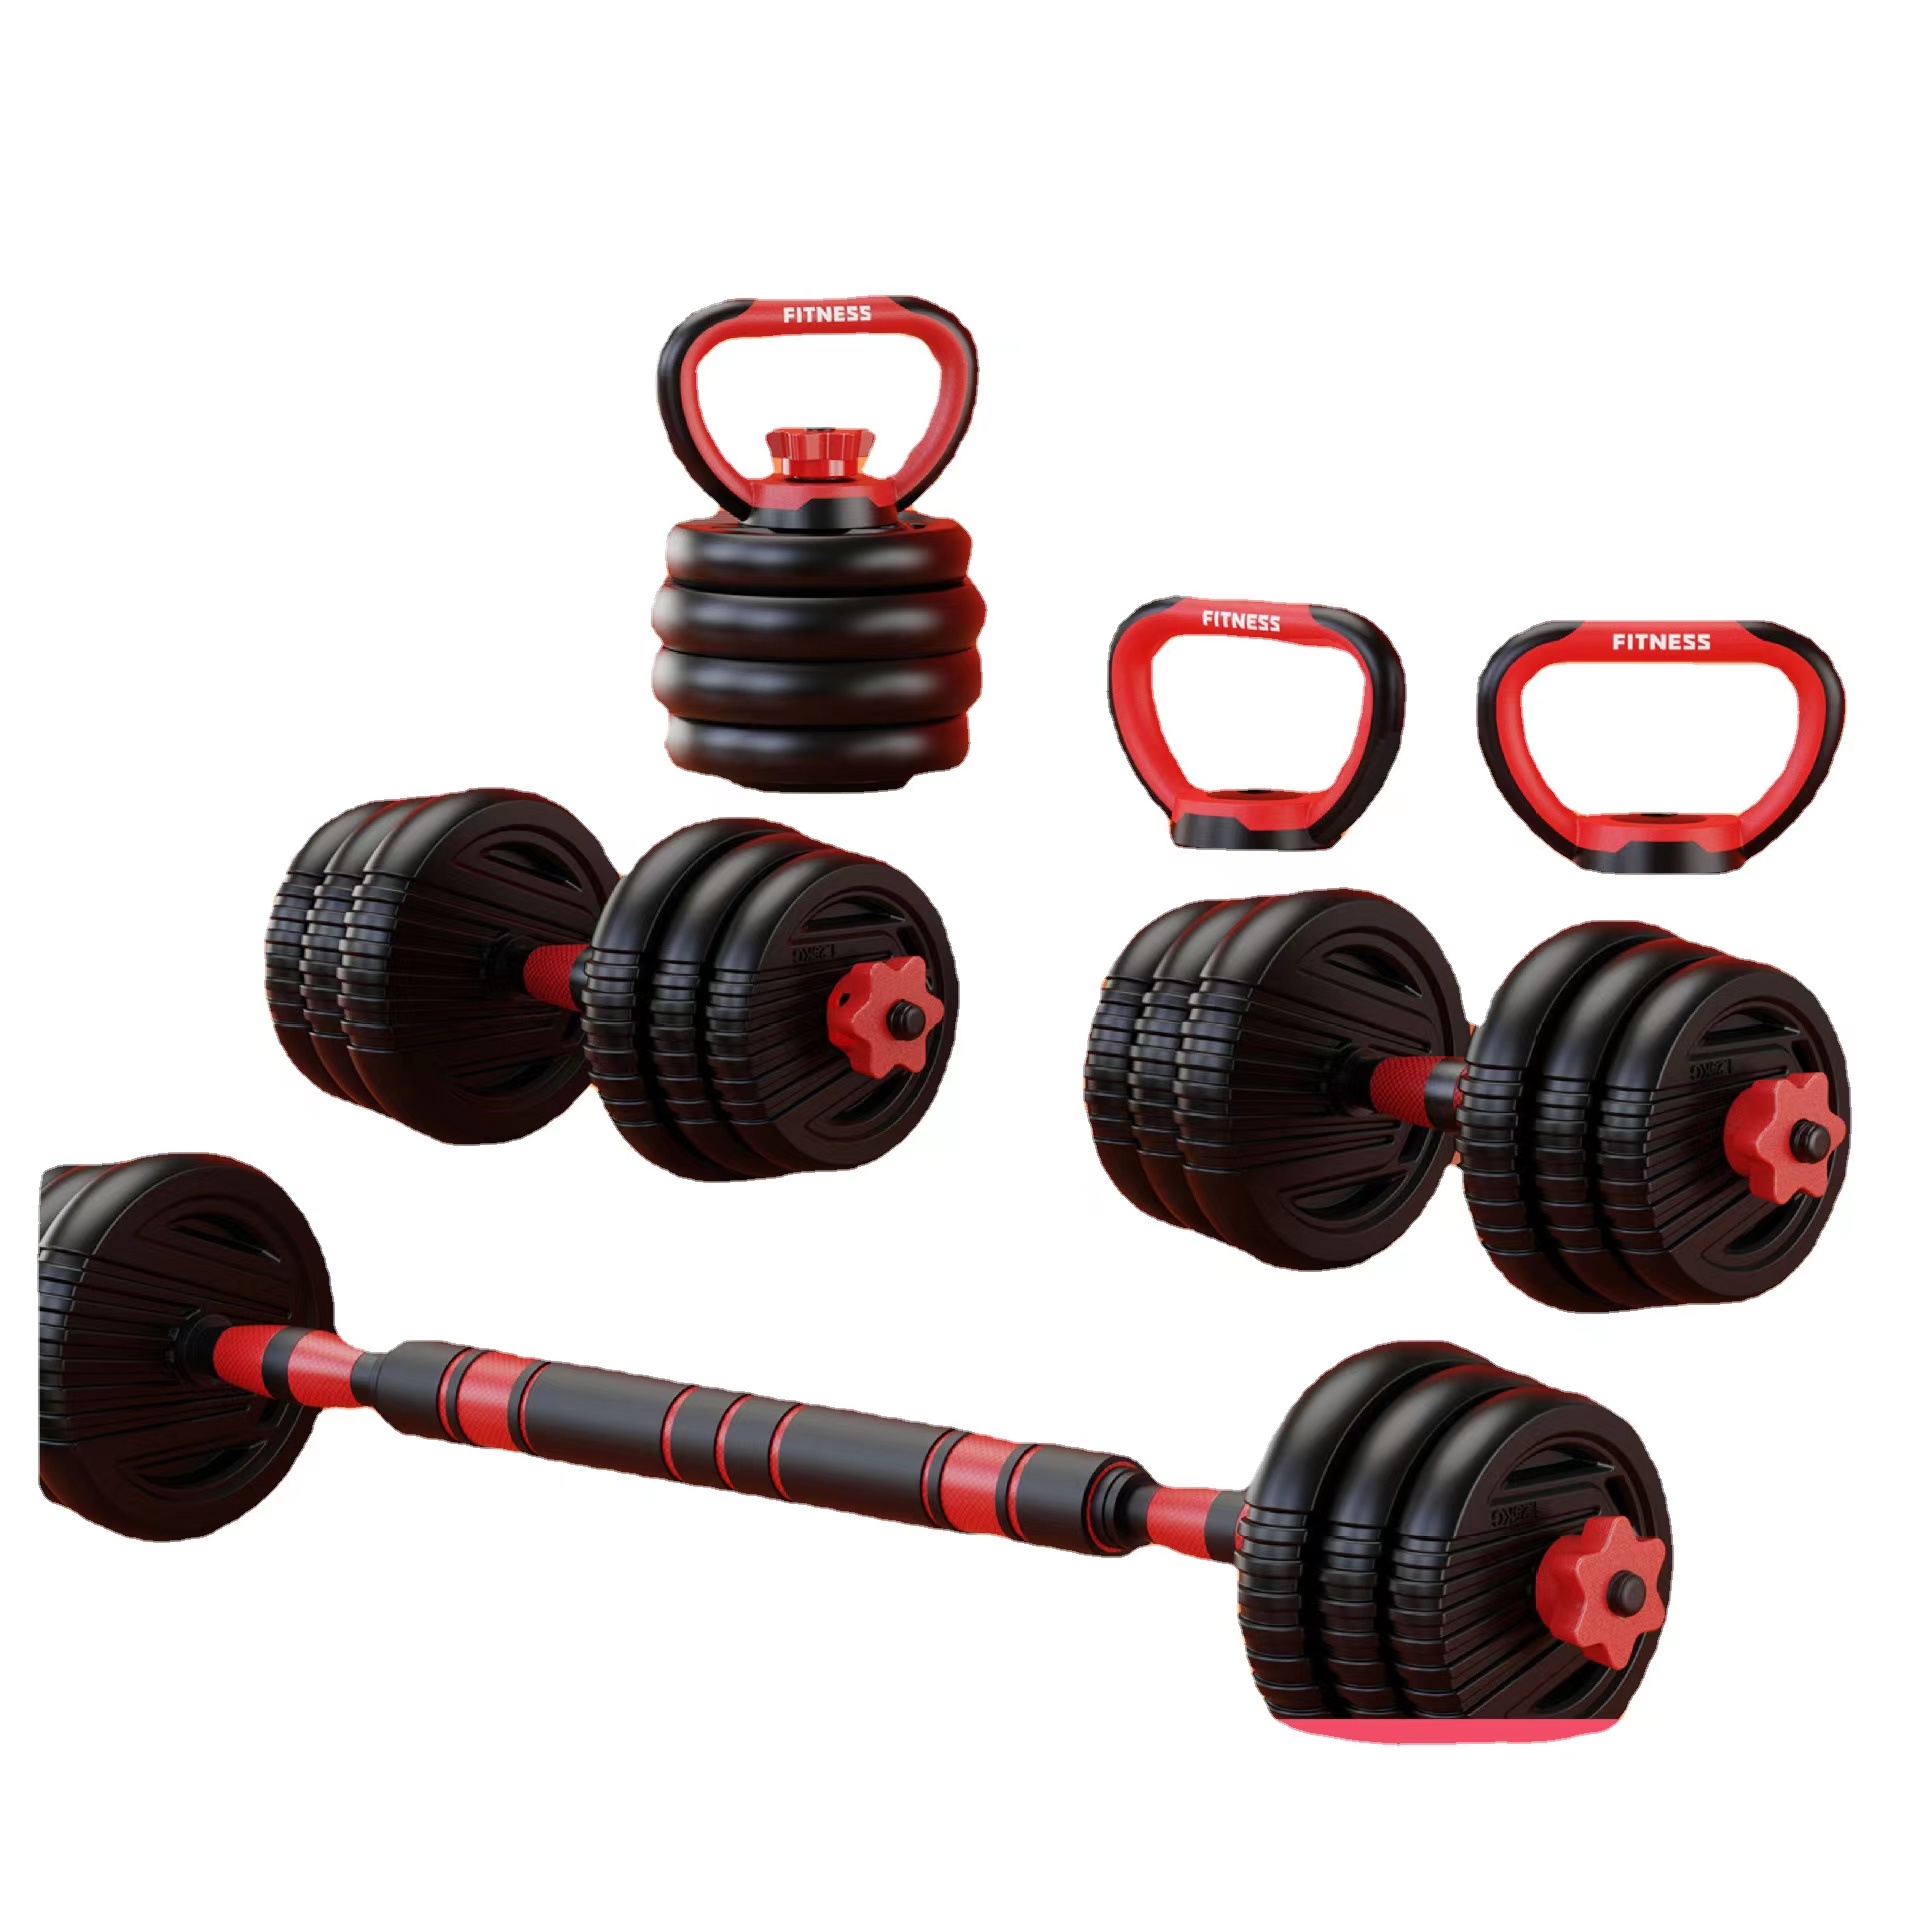 China Wholesale Rubber Hex Dumbbell Black Factories - New cement kettlebell dumbbell sets – Hongyu